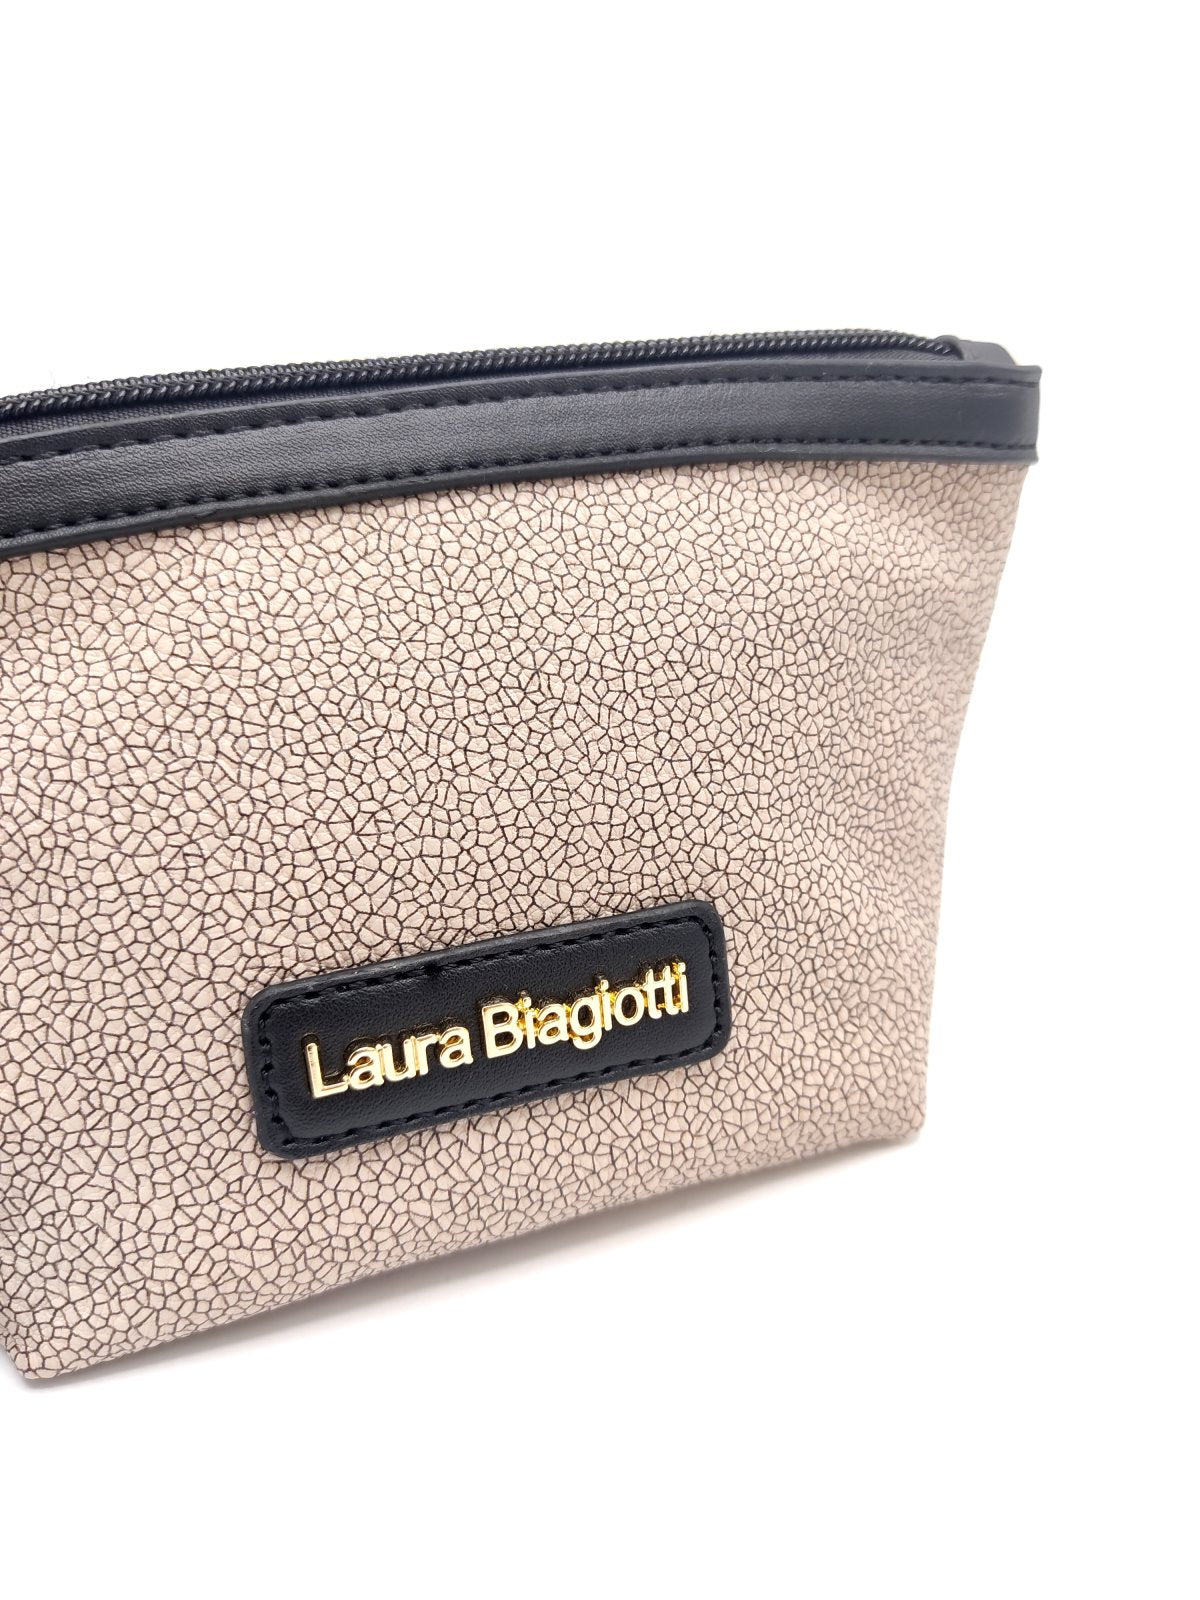 Brand Laura Biagiotti, Printed eco leather beauty bag, made in China, art. LB112-8